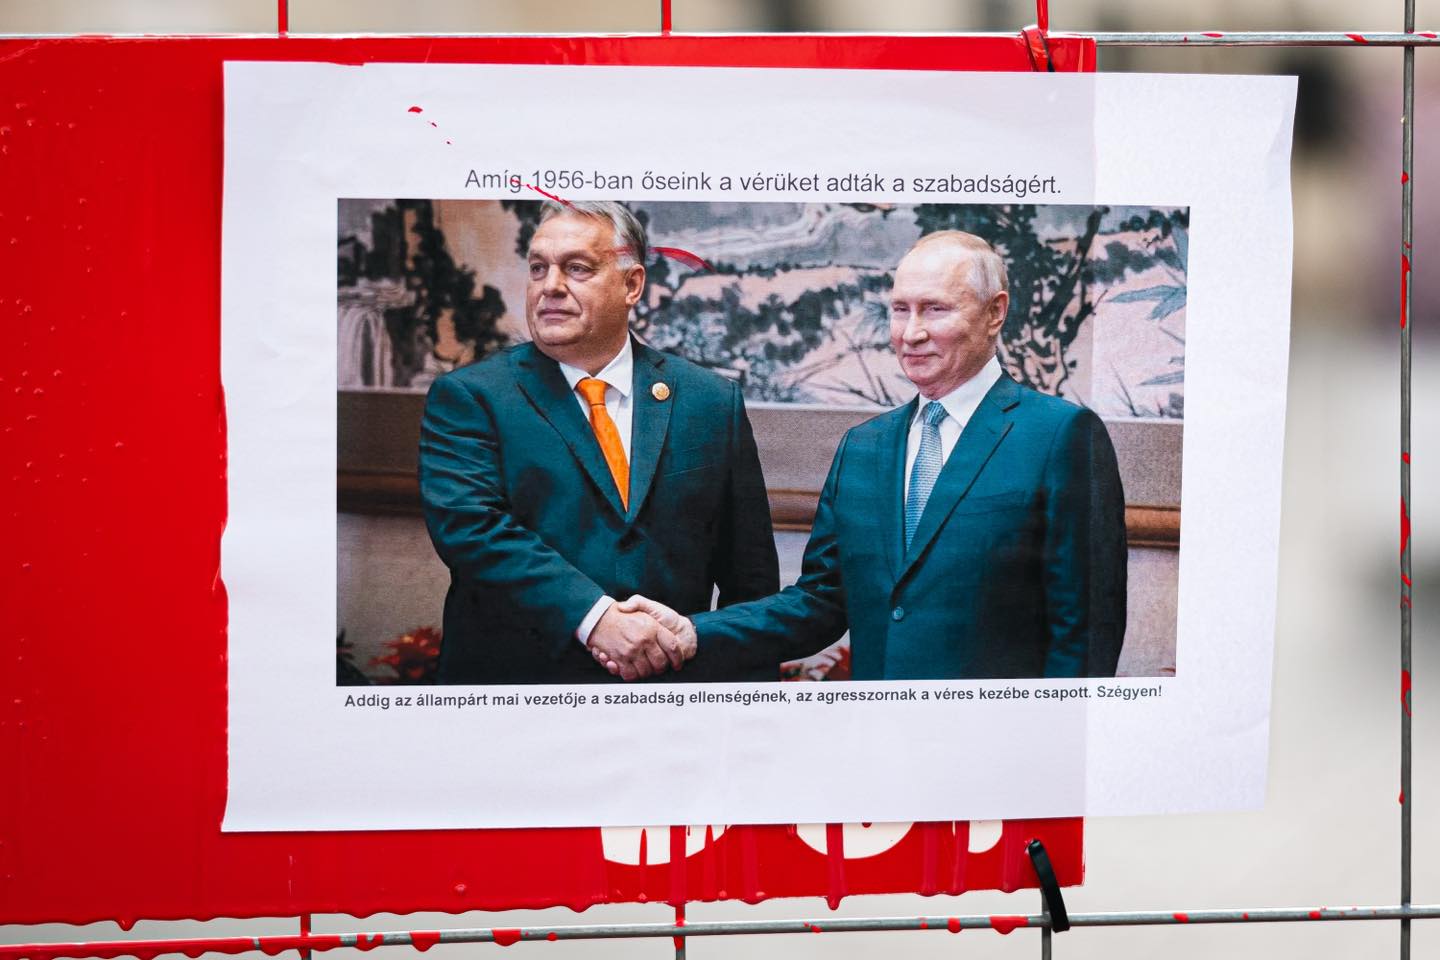 In Budapest, opposition parliamentarians splashed red paint on Orban's office